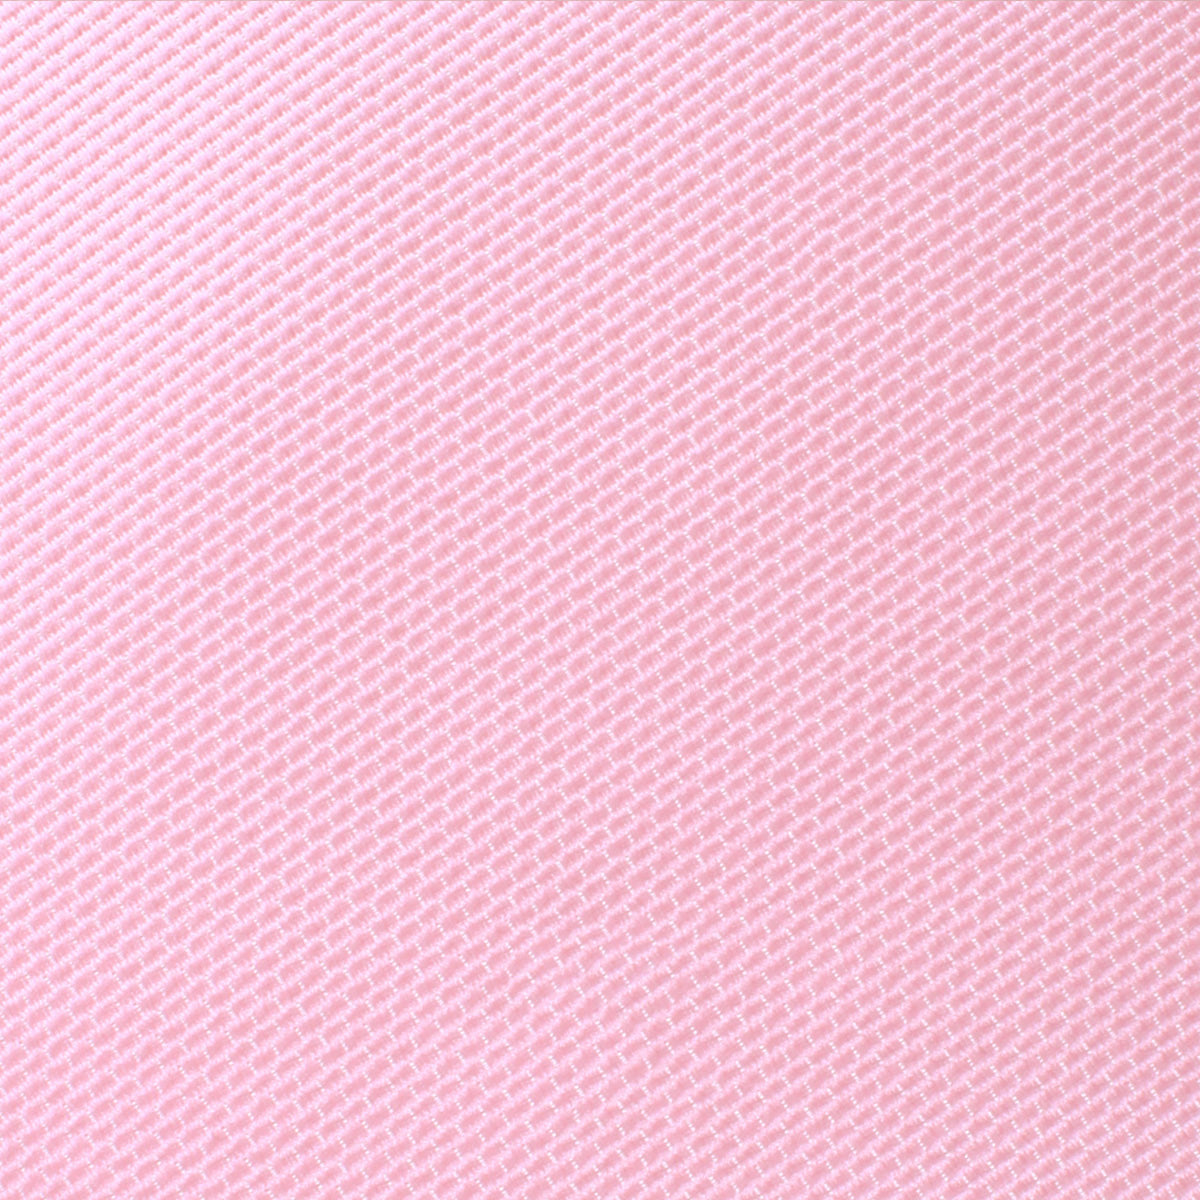 Tickled Pink Weave Self Bow Tie Fabric